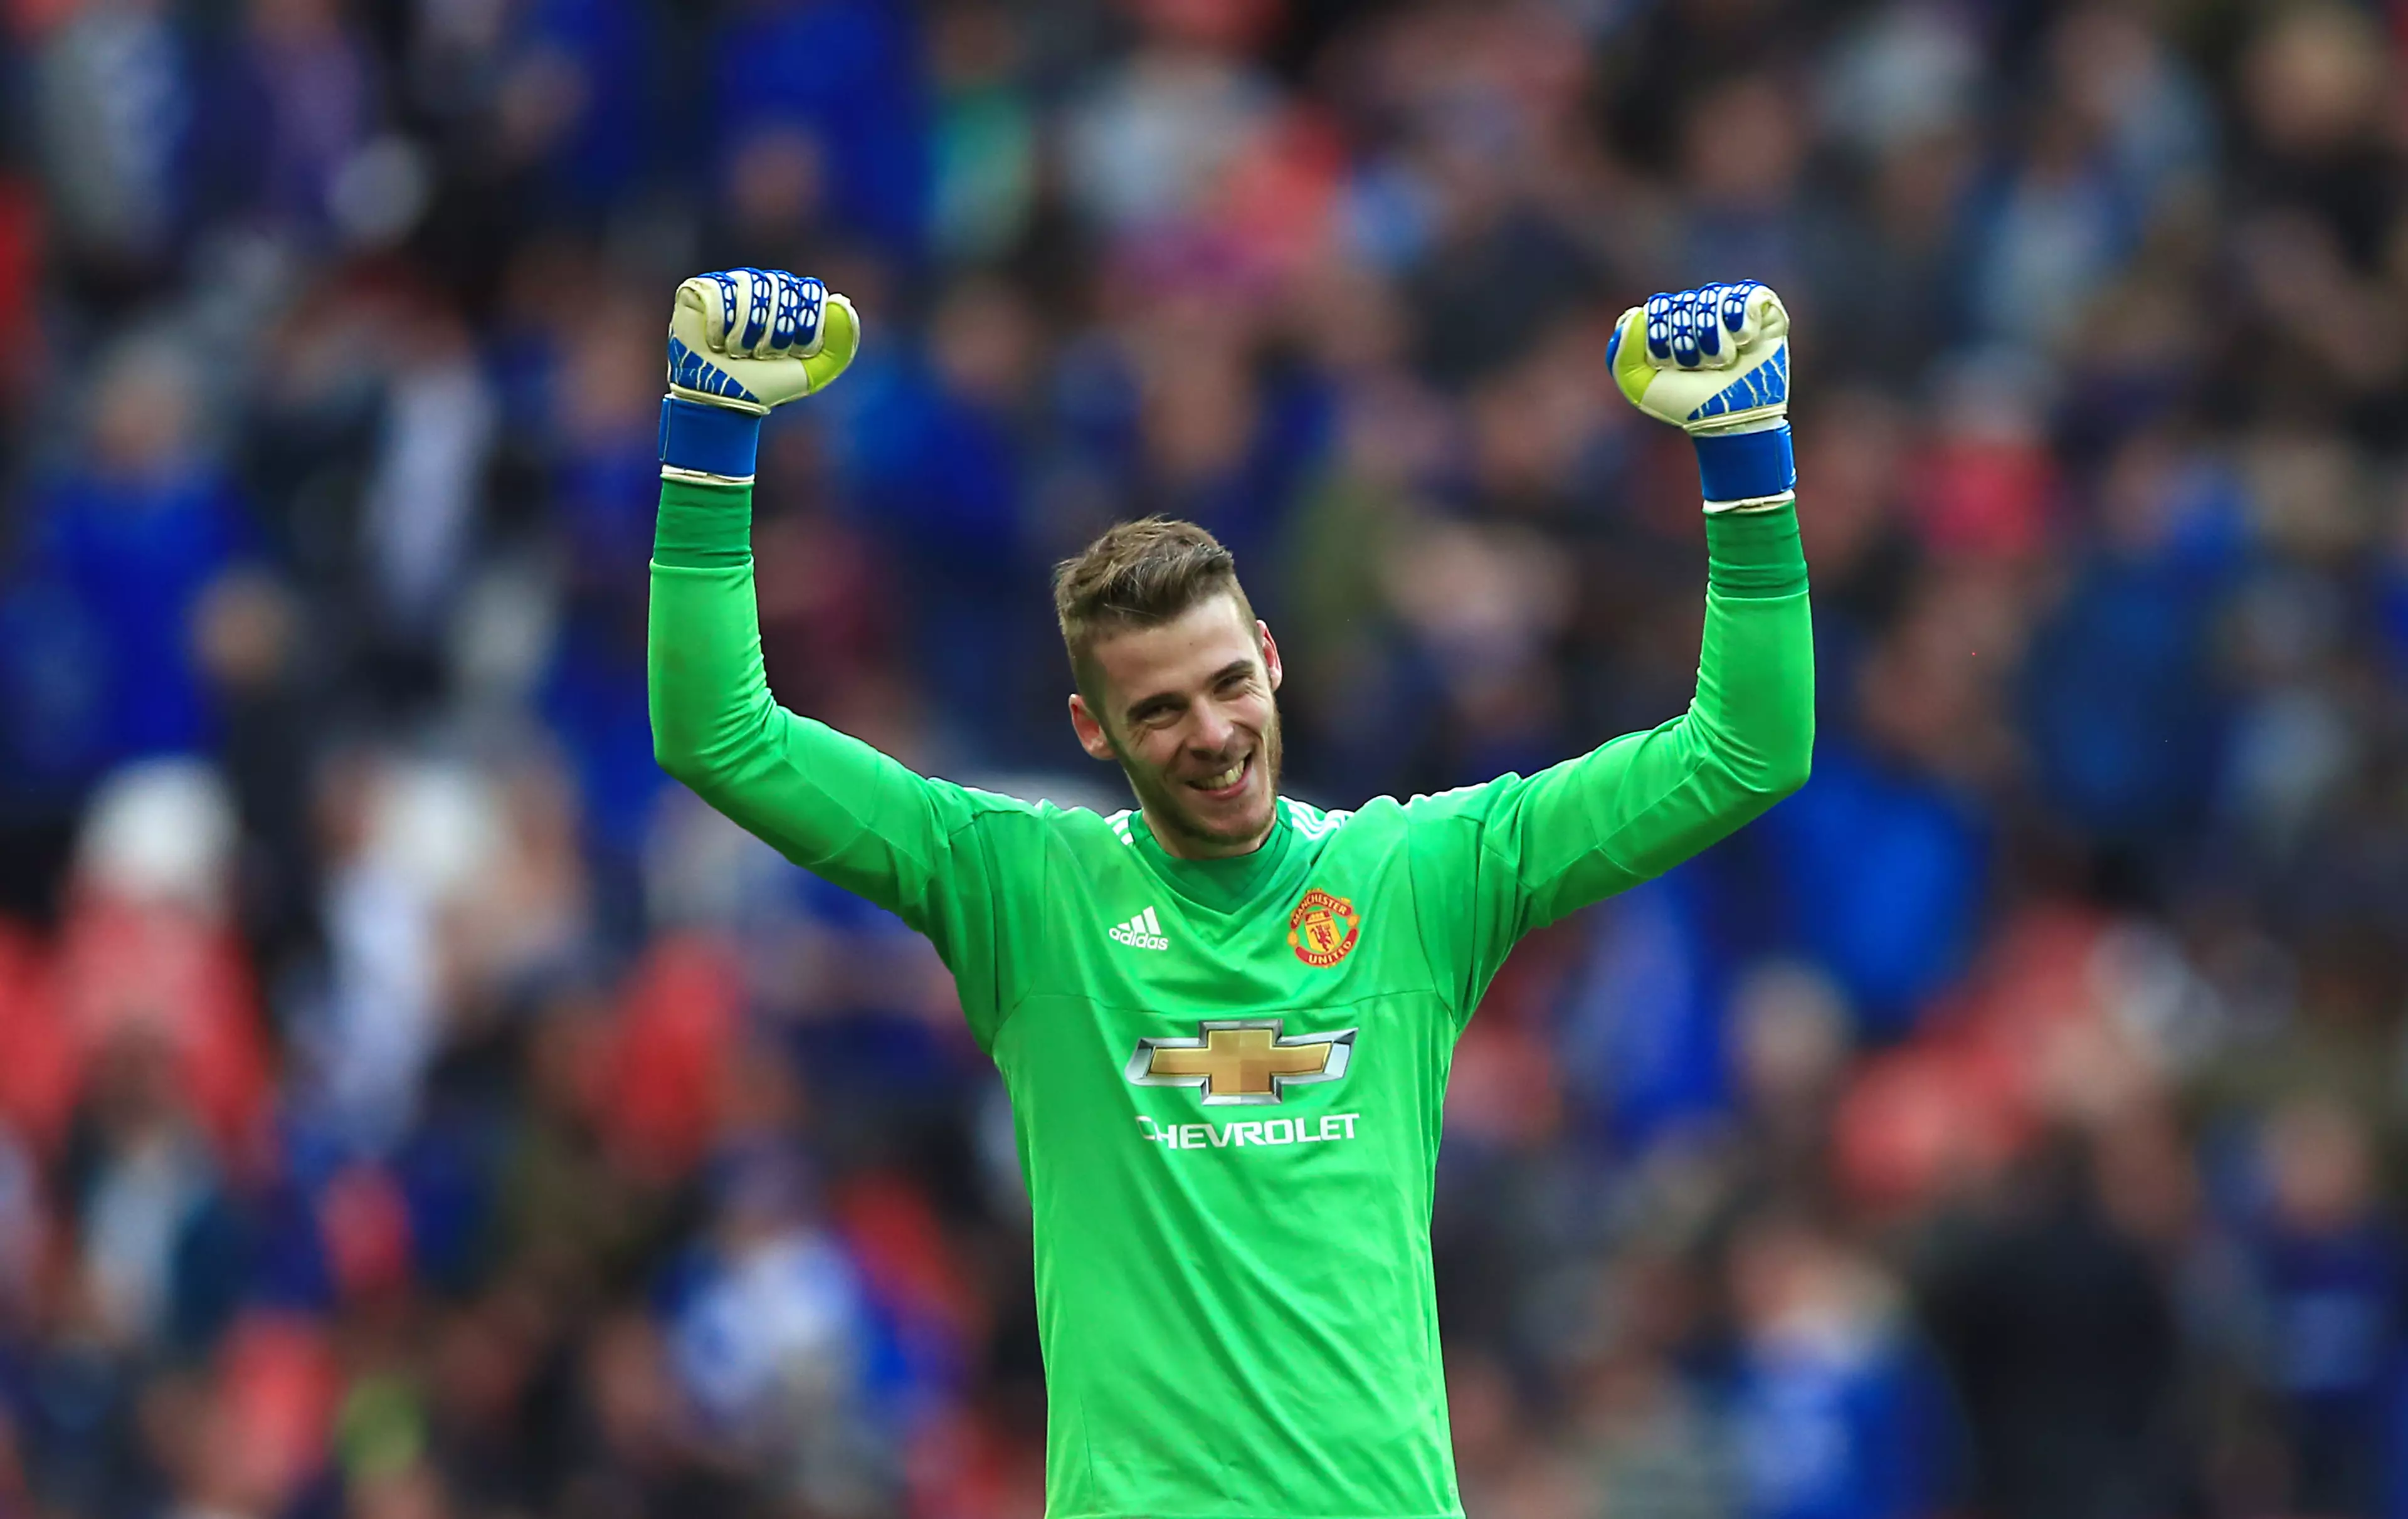 De Gea has been offered a massive new deal. Image: PA Images